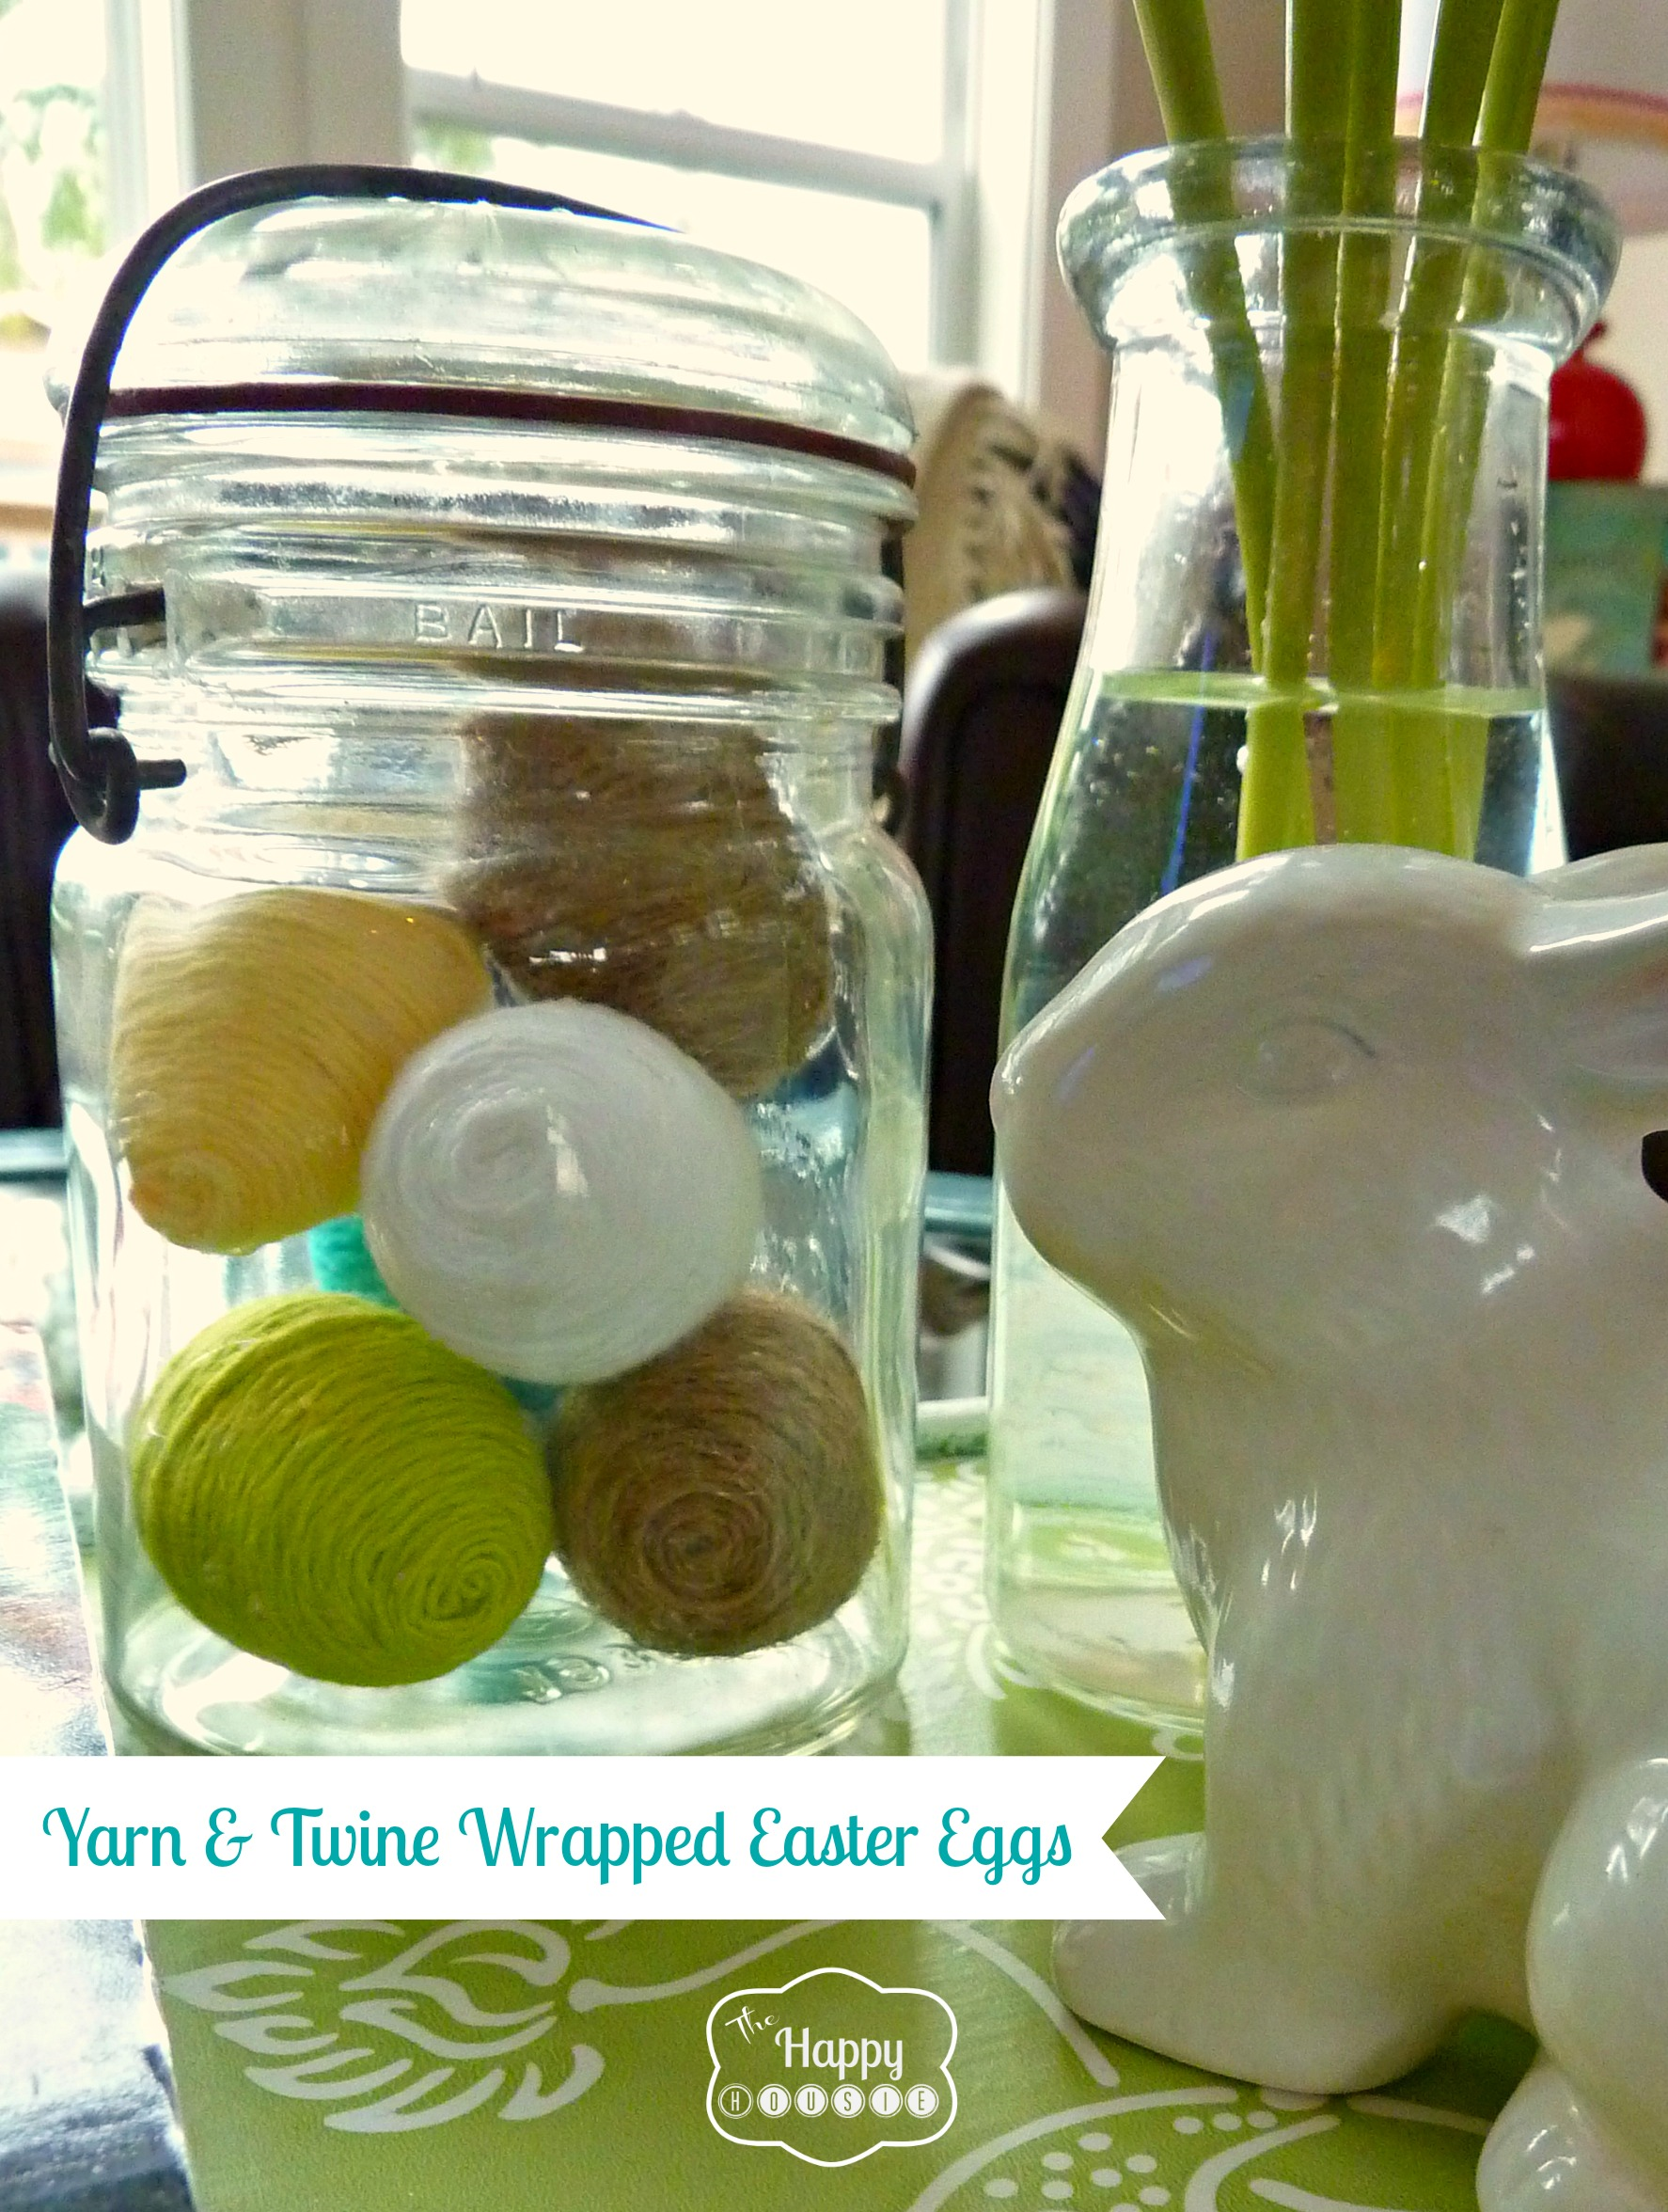 The yarn wrapped Easter eggs displayed on the table.